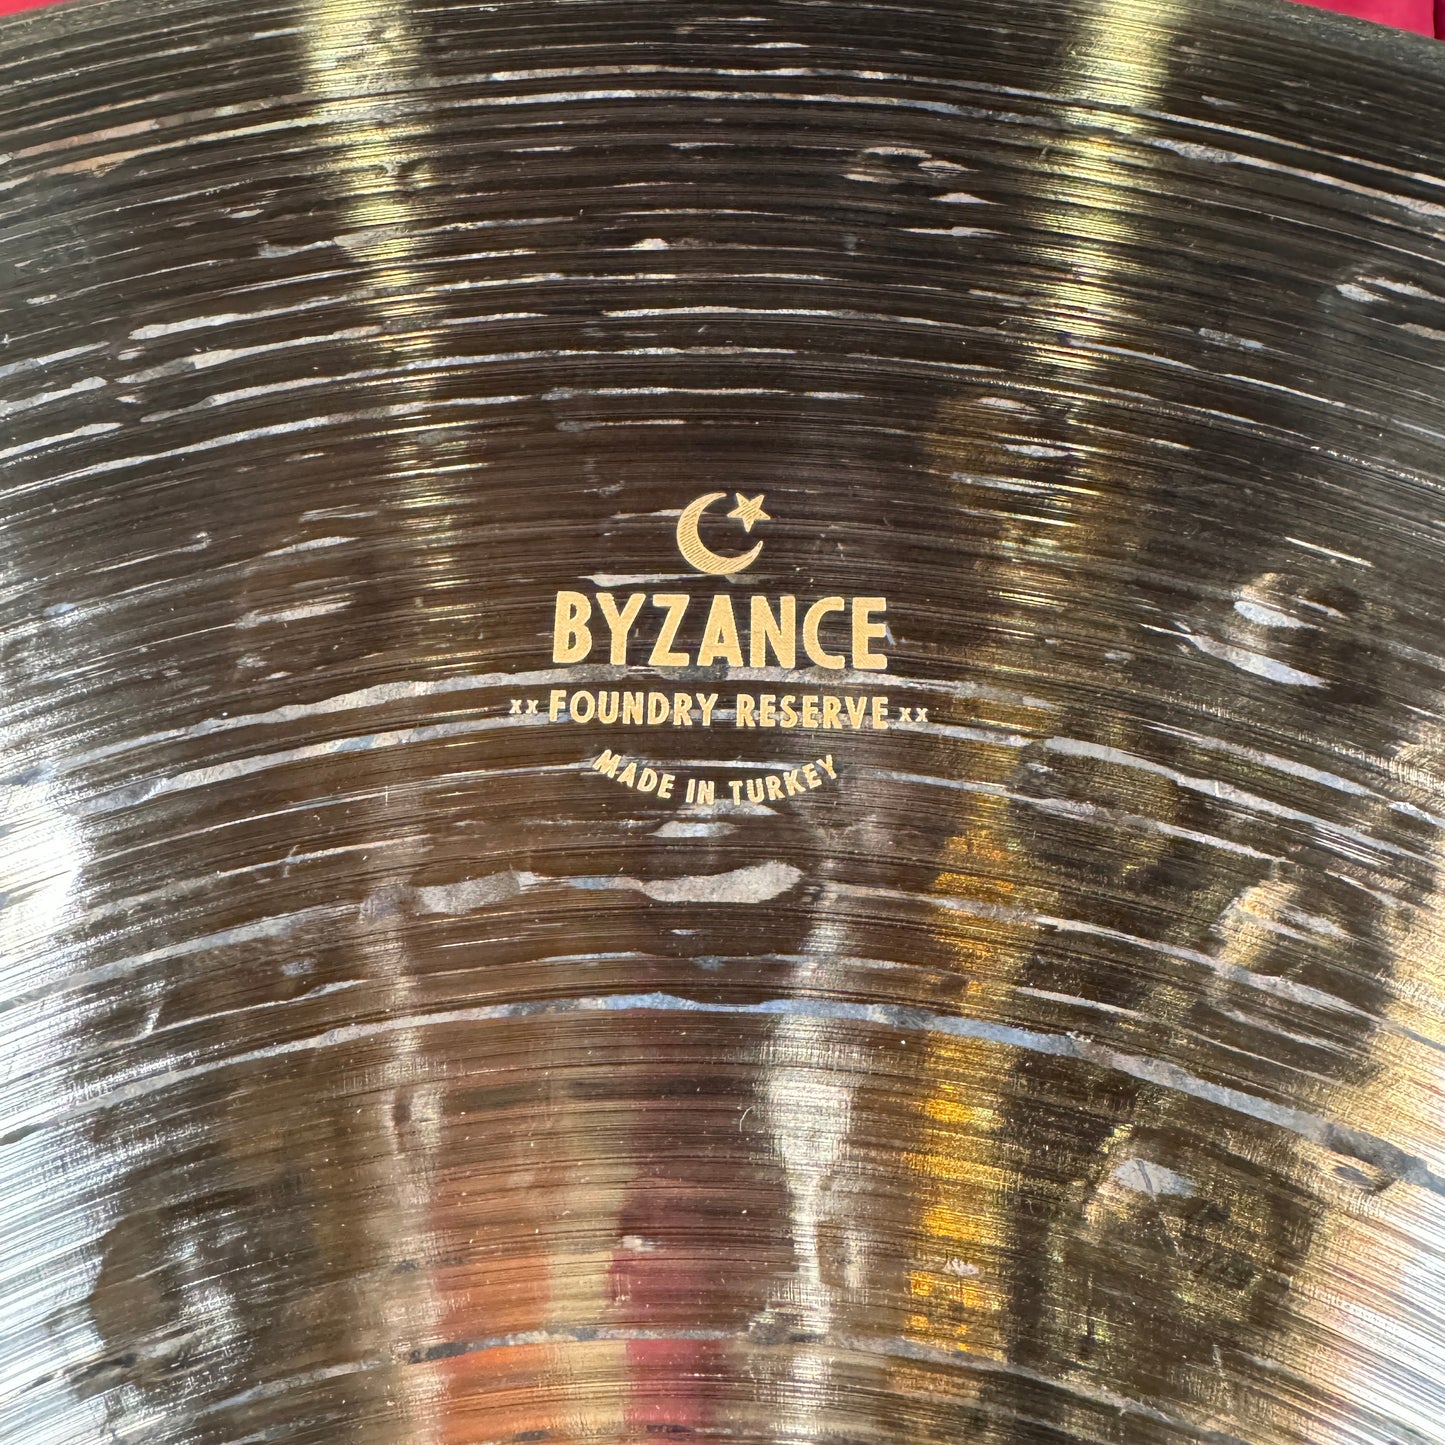 20" Meinl Byzance Foundry Reserve Ride Cymbal 2135g *Video Demo*